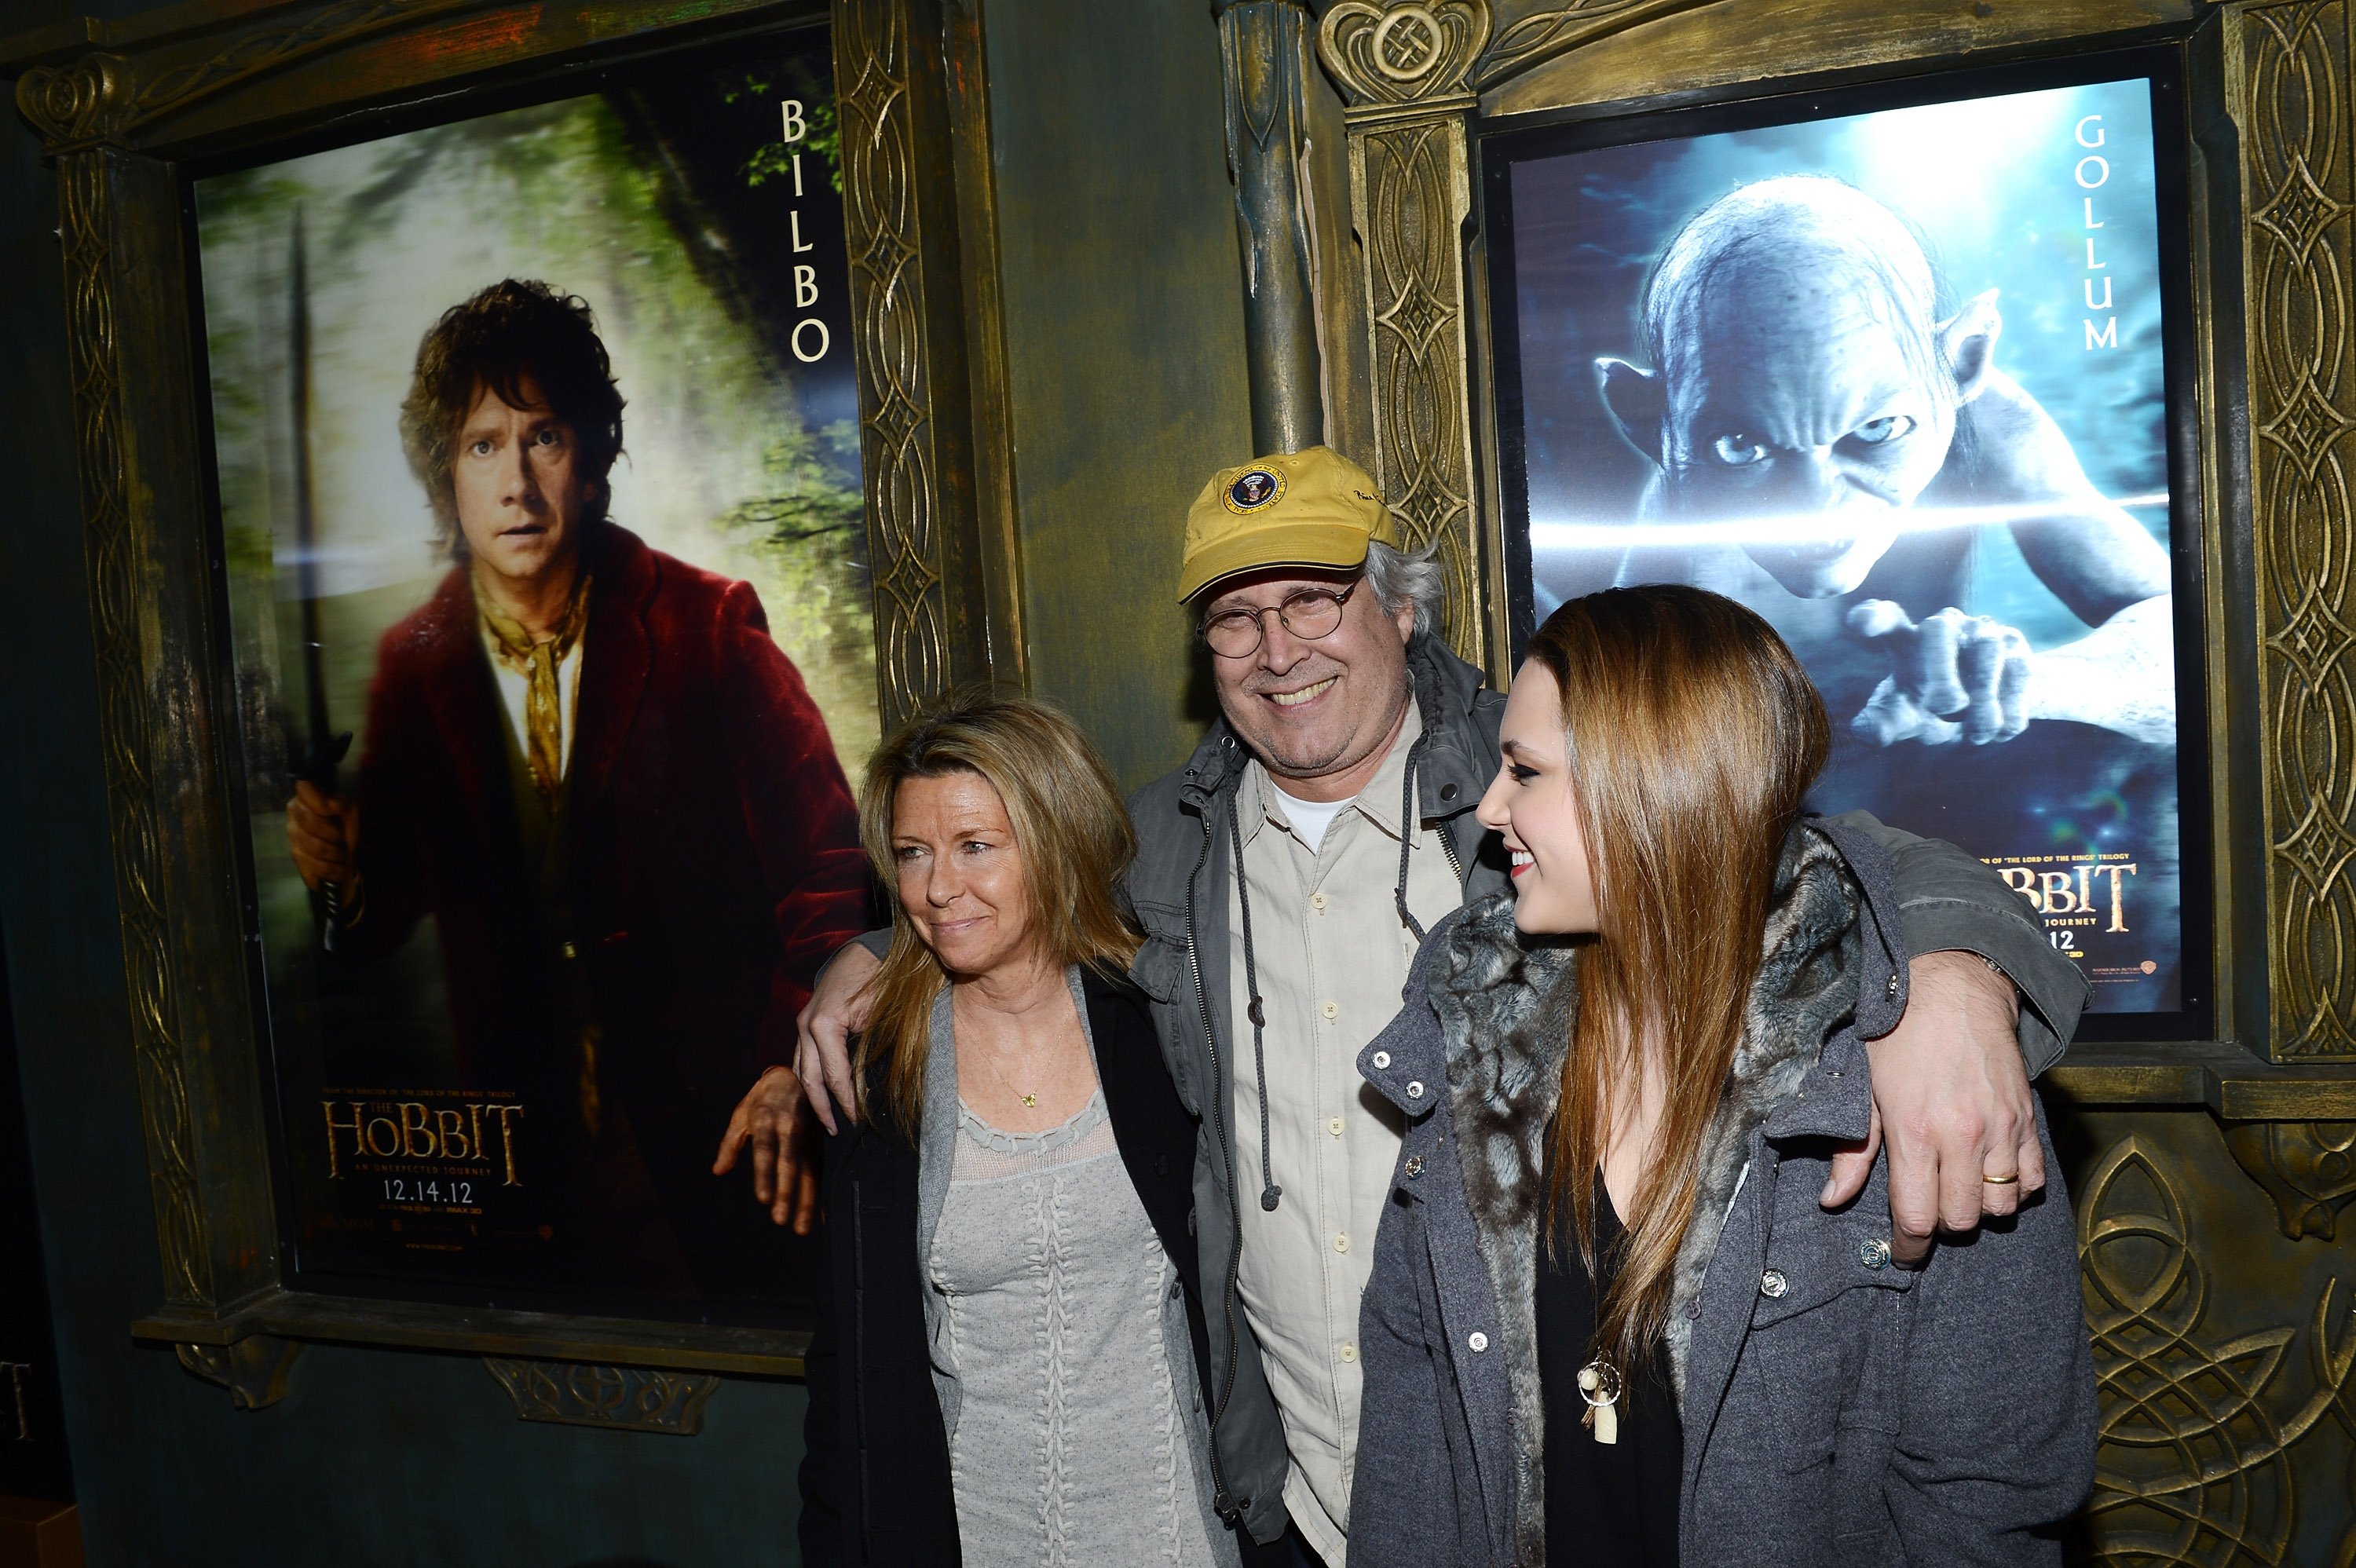 Jayni Chase, Cydney Chase, and Chevy Chase at the premiere of "The Hobbit: An Unexpected Journey" on December 6, 2012, in New York | Source: Getty